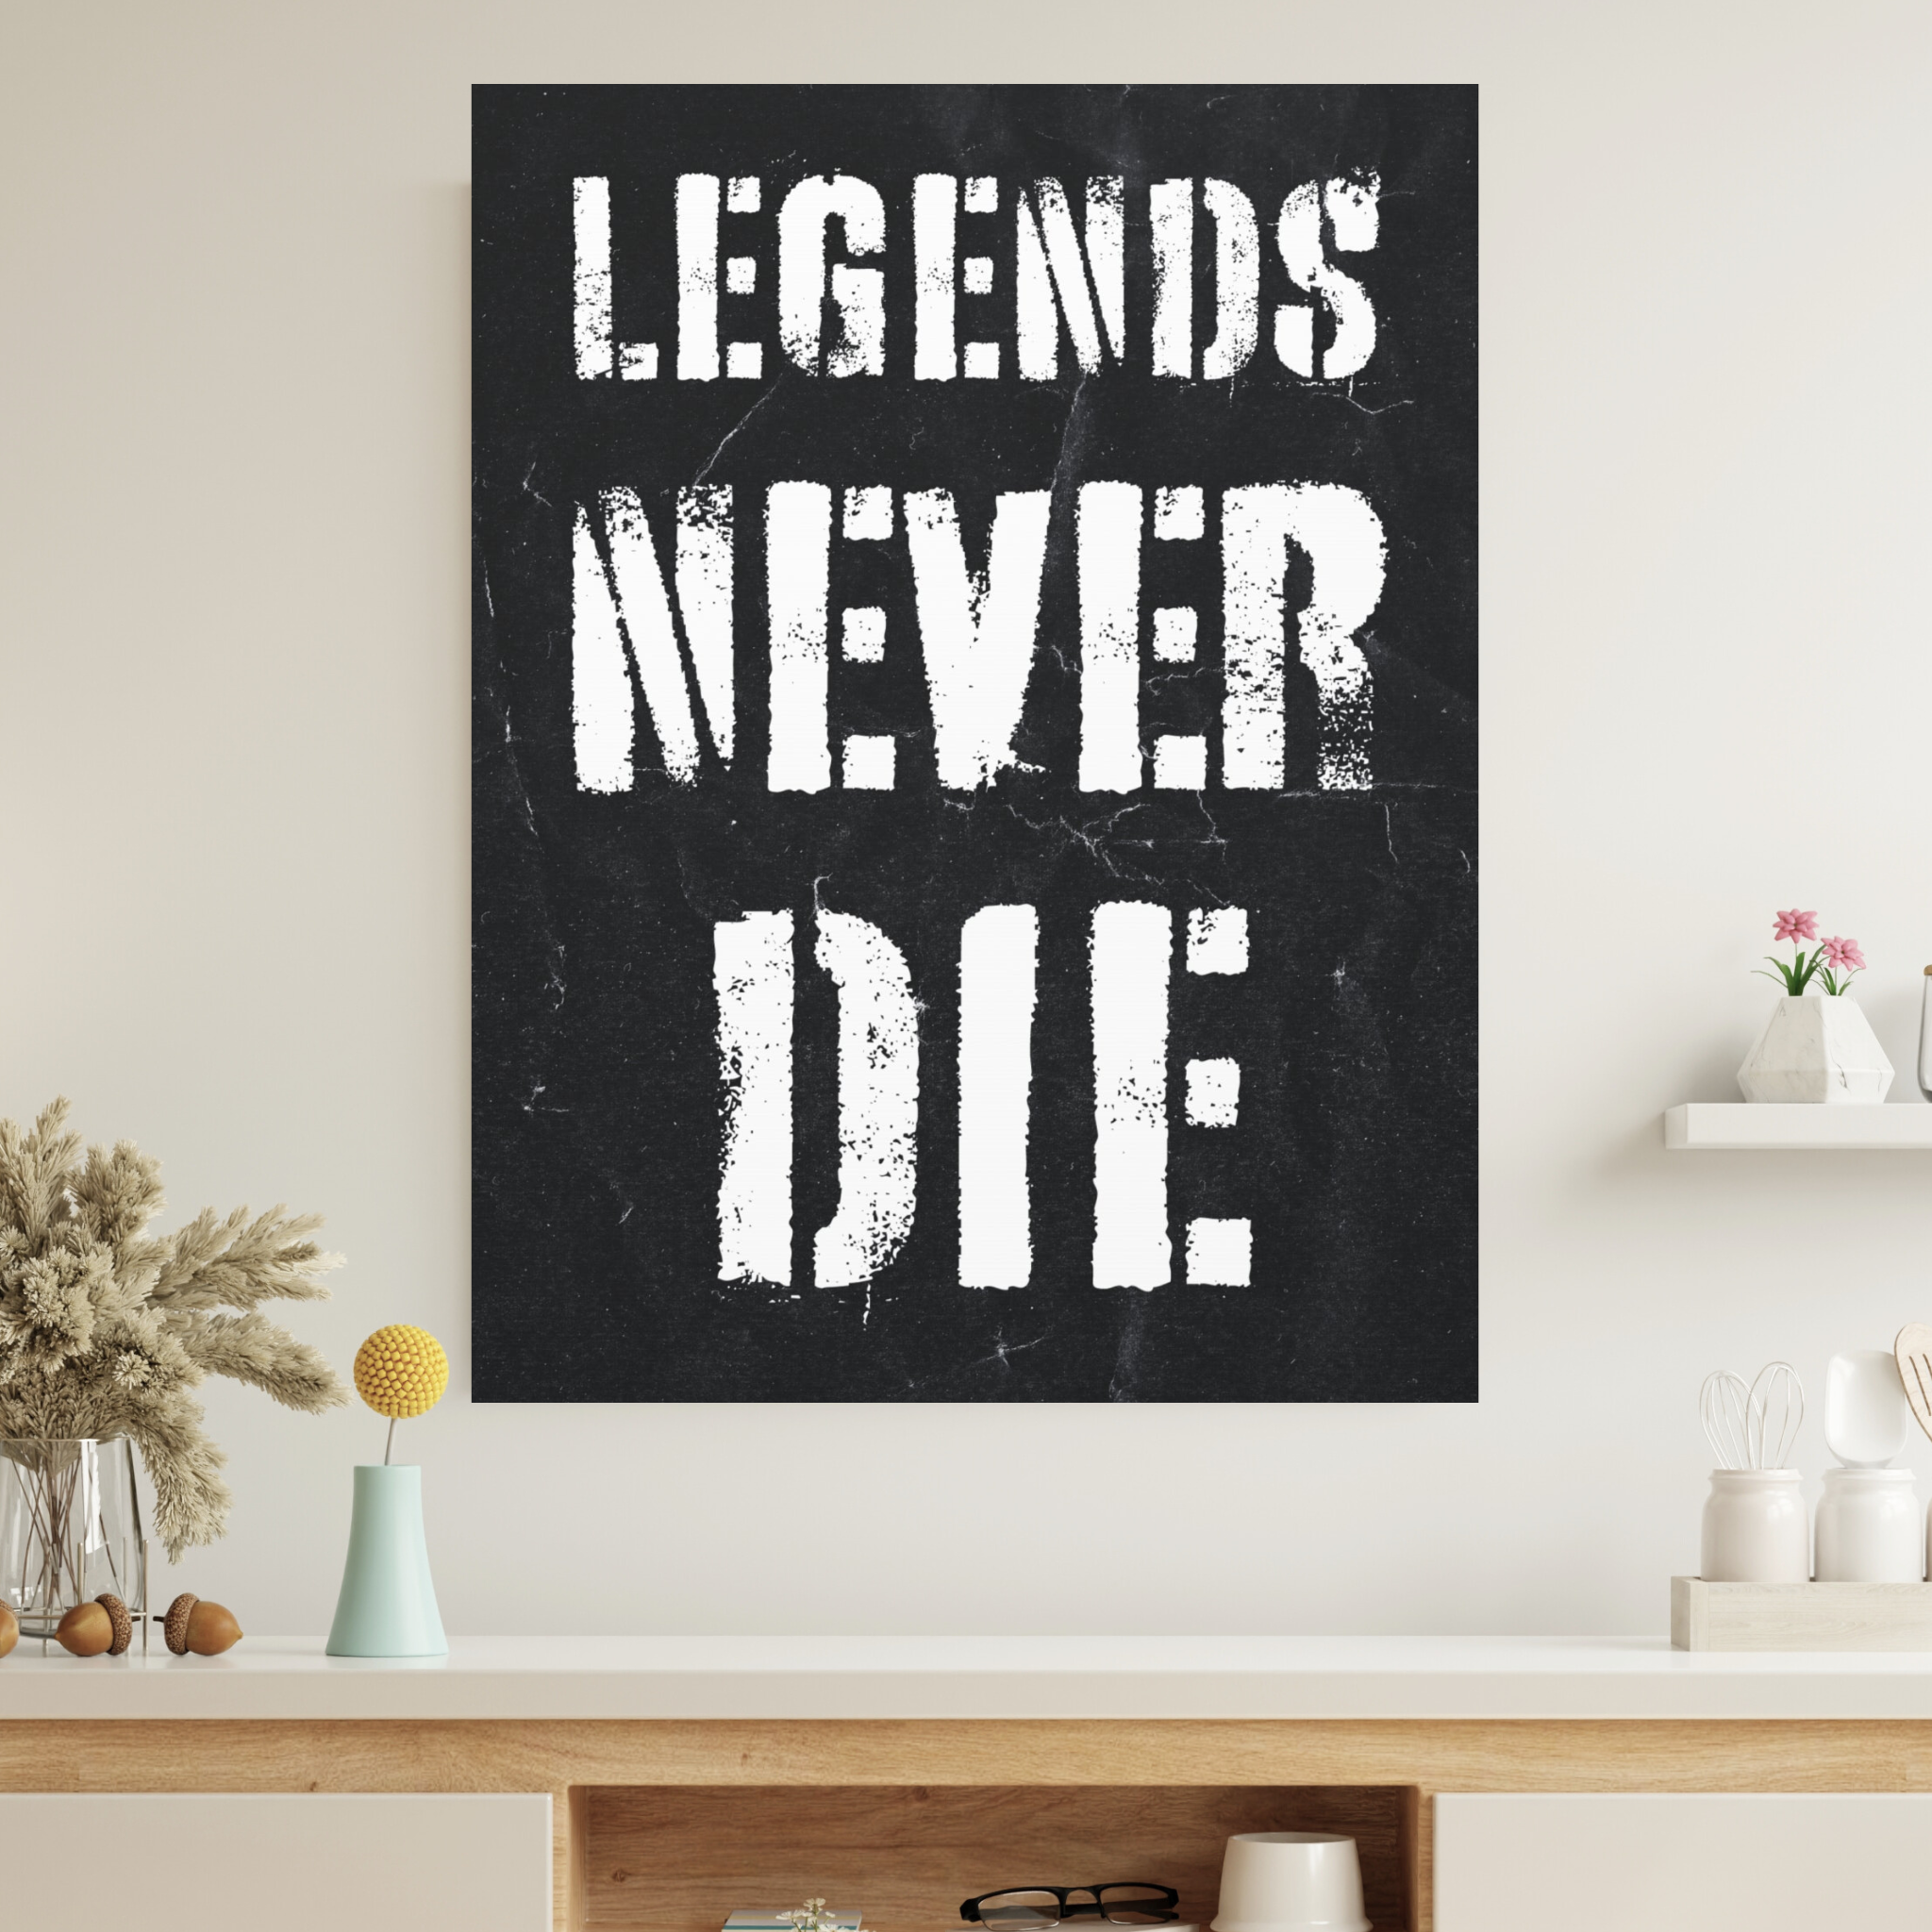 Legends Never Die Wall Art additional image 1